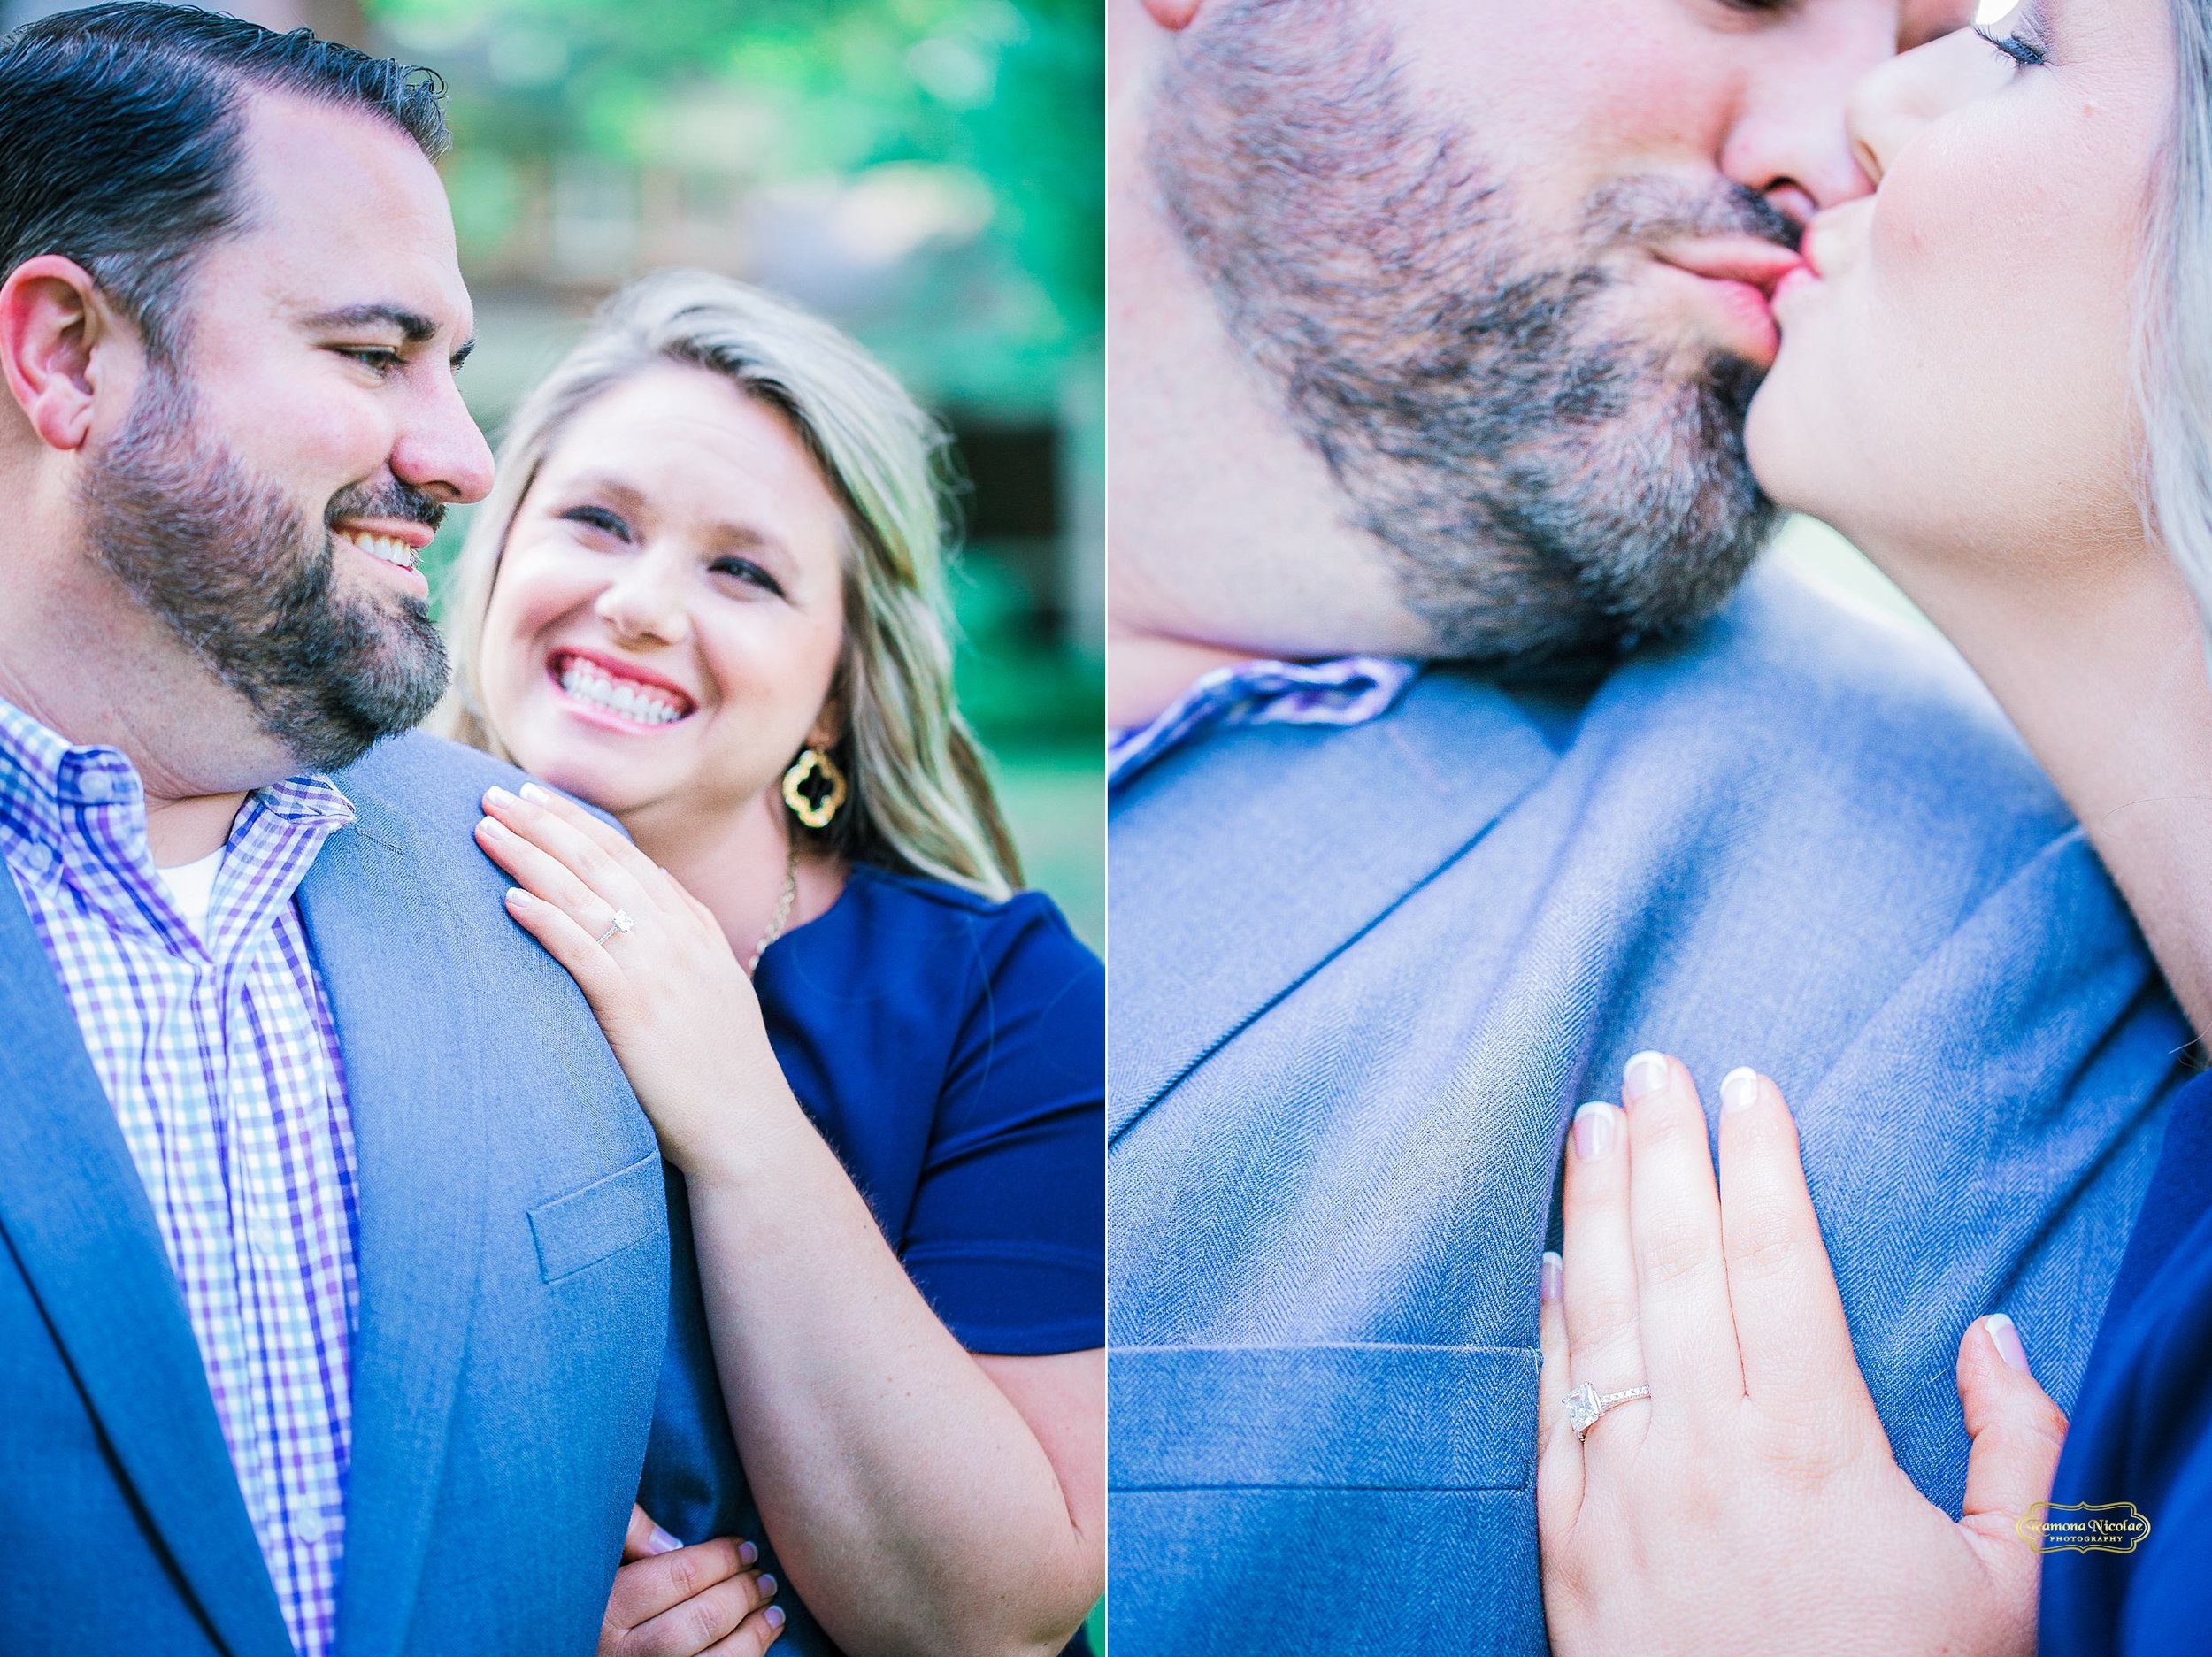 couple kissing and engagement ring details during bridal session at wachesaw plantation with ramona nicolae photography.jpg